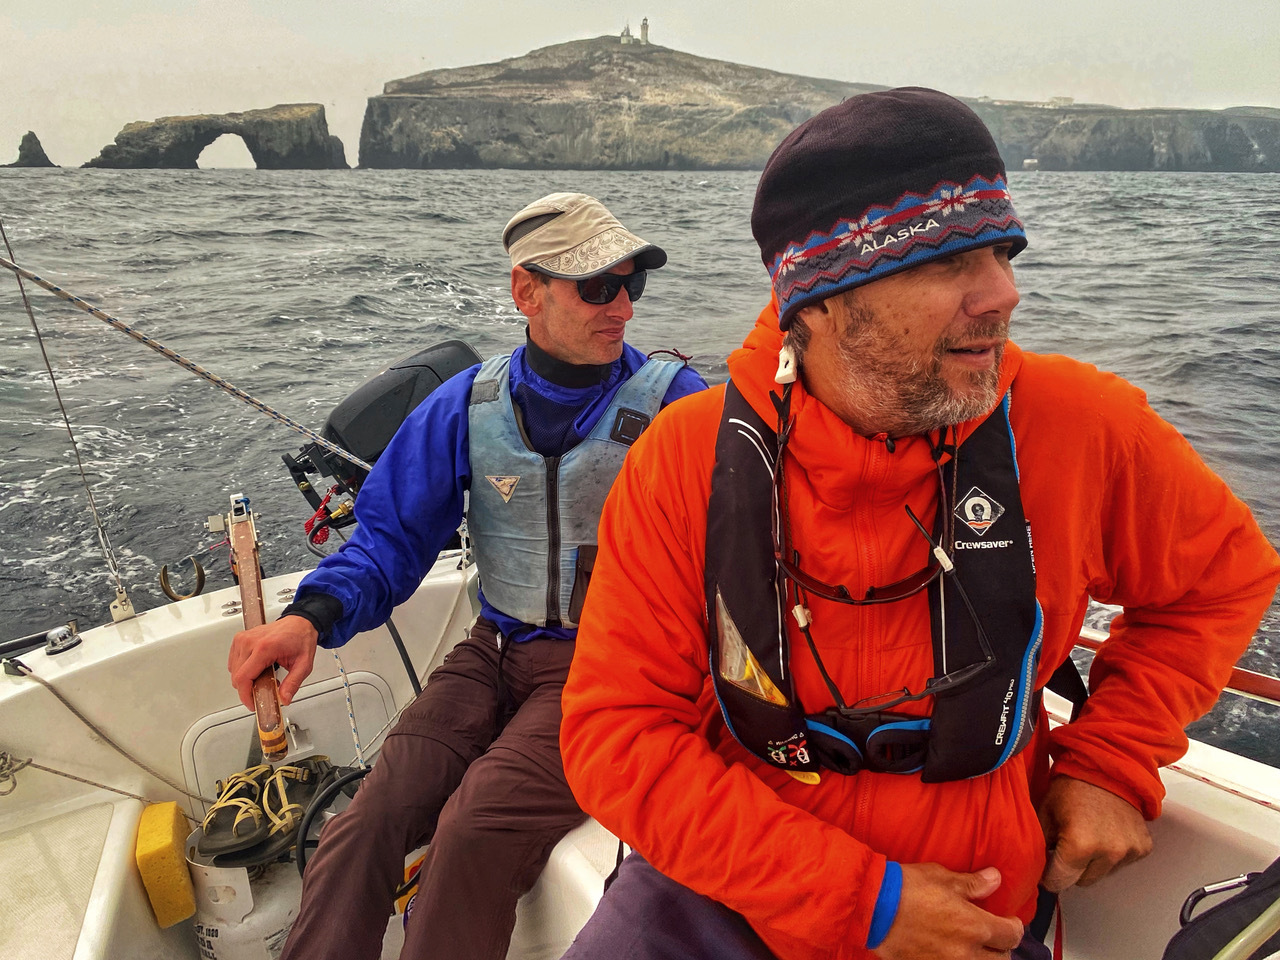 Cruising-to-Anacapa-West-Wight-Potter-by-carolyn-Hay